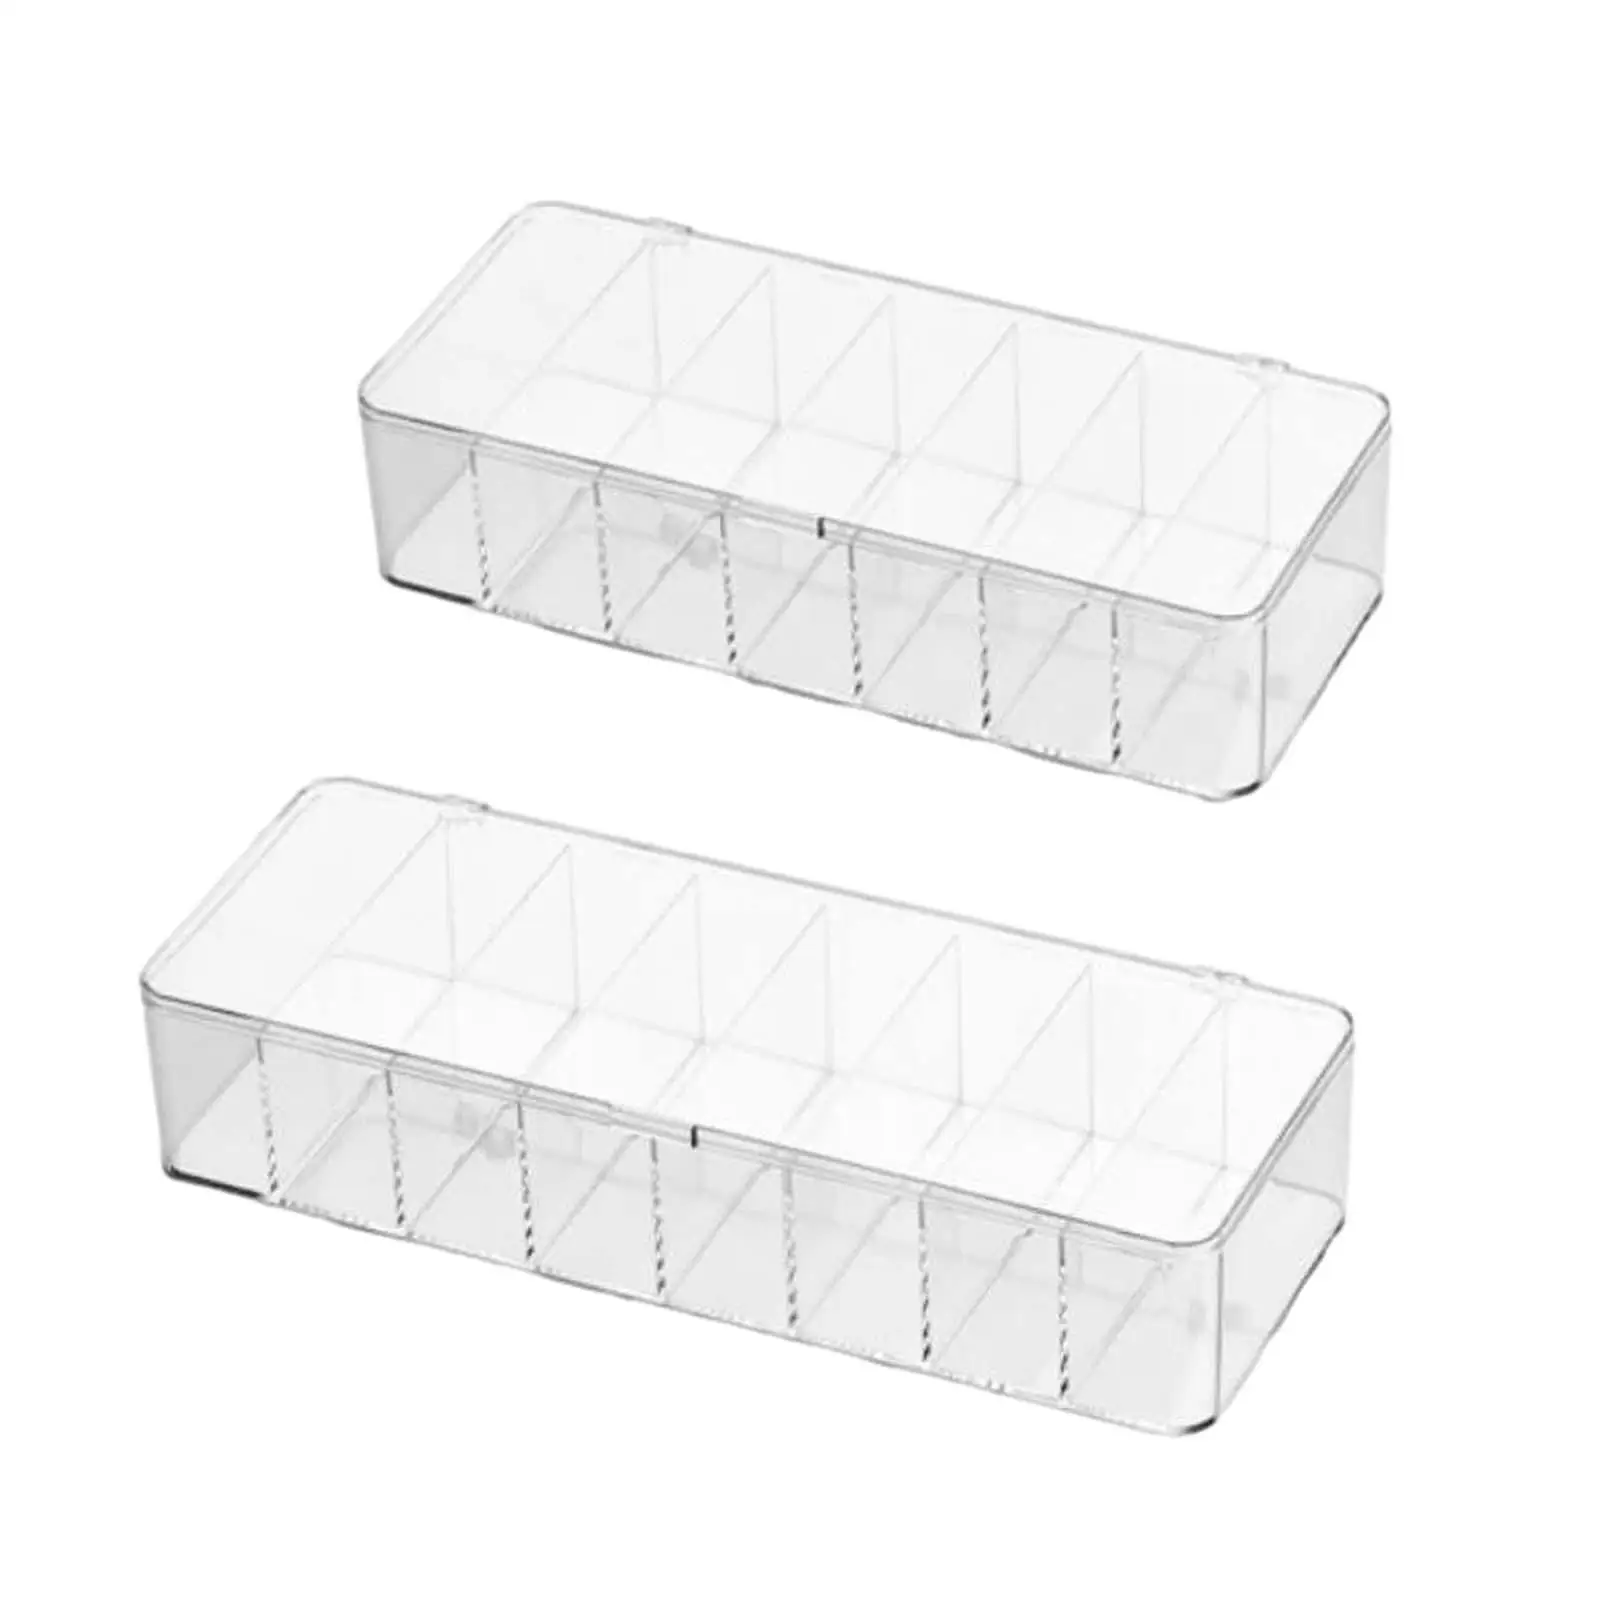 Clear Electronics Organizer Boxes, Acrylic Organizer, Cord Organizer Case, Data Cable Storage Box for Home, Office